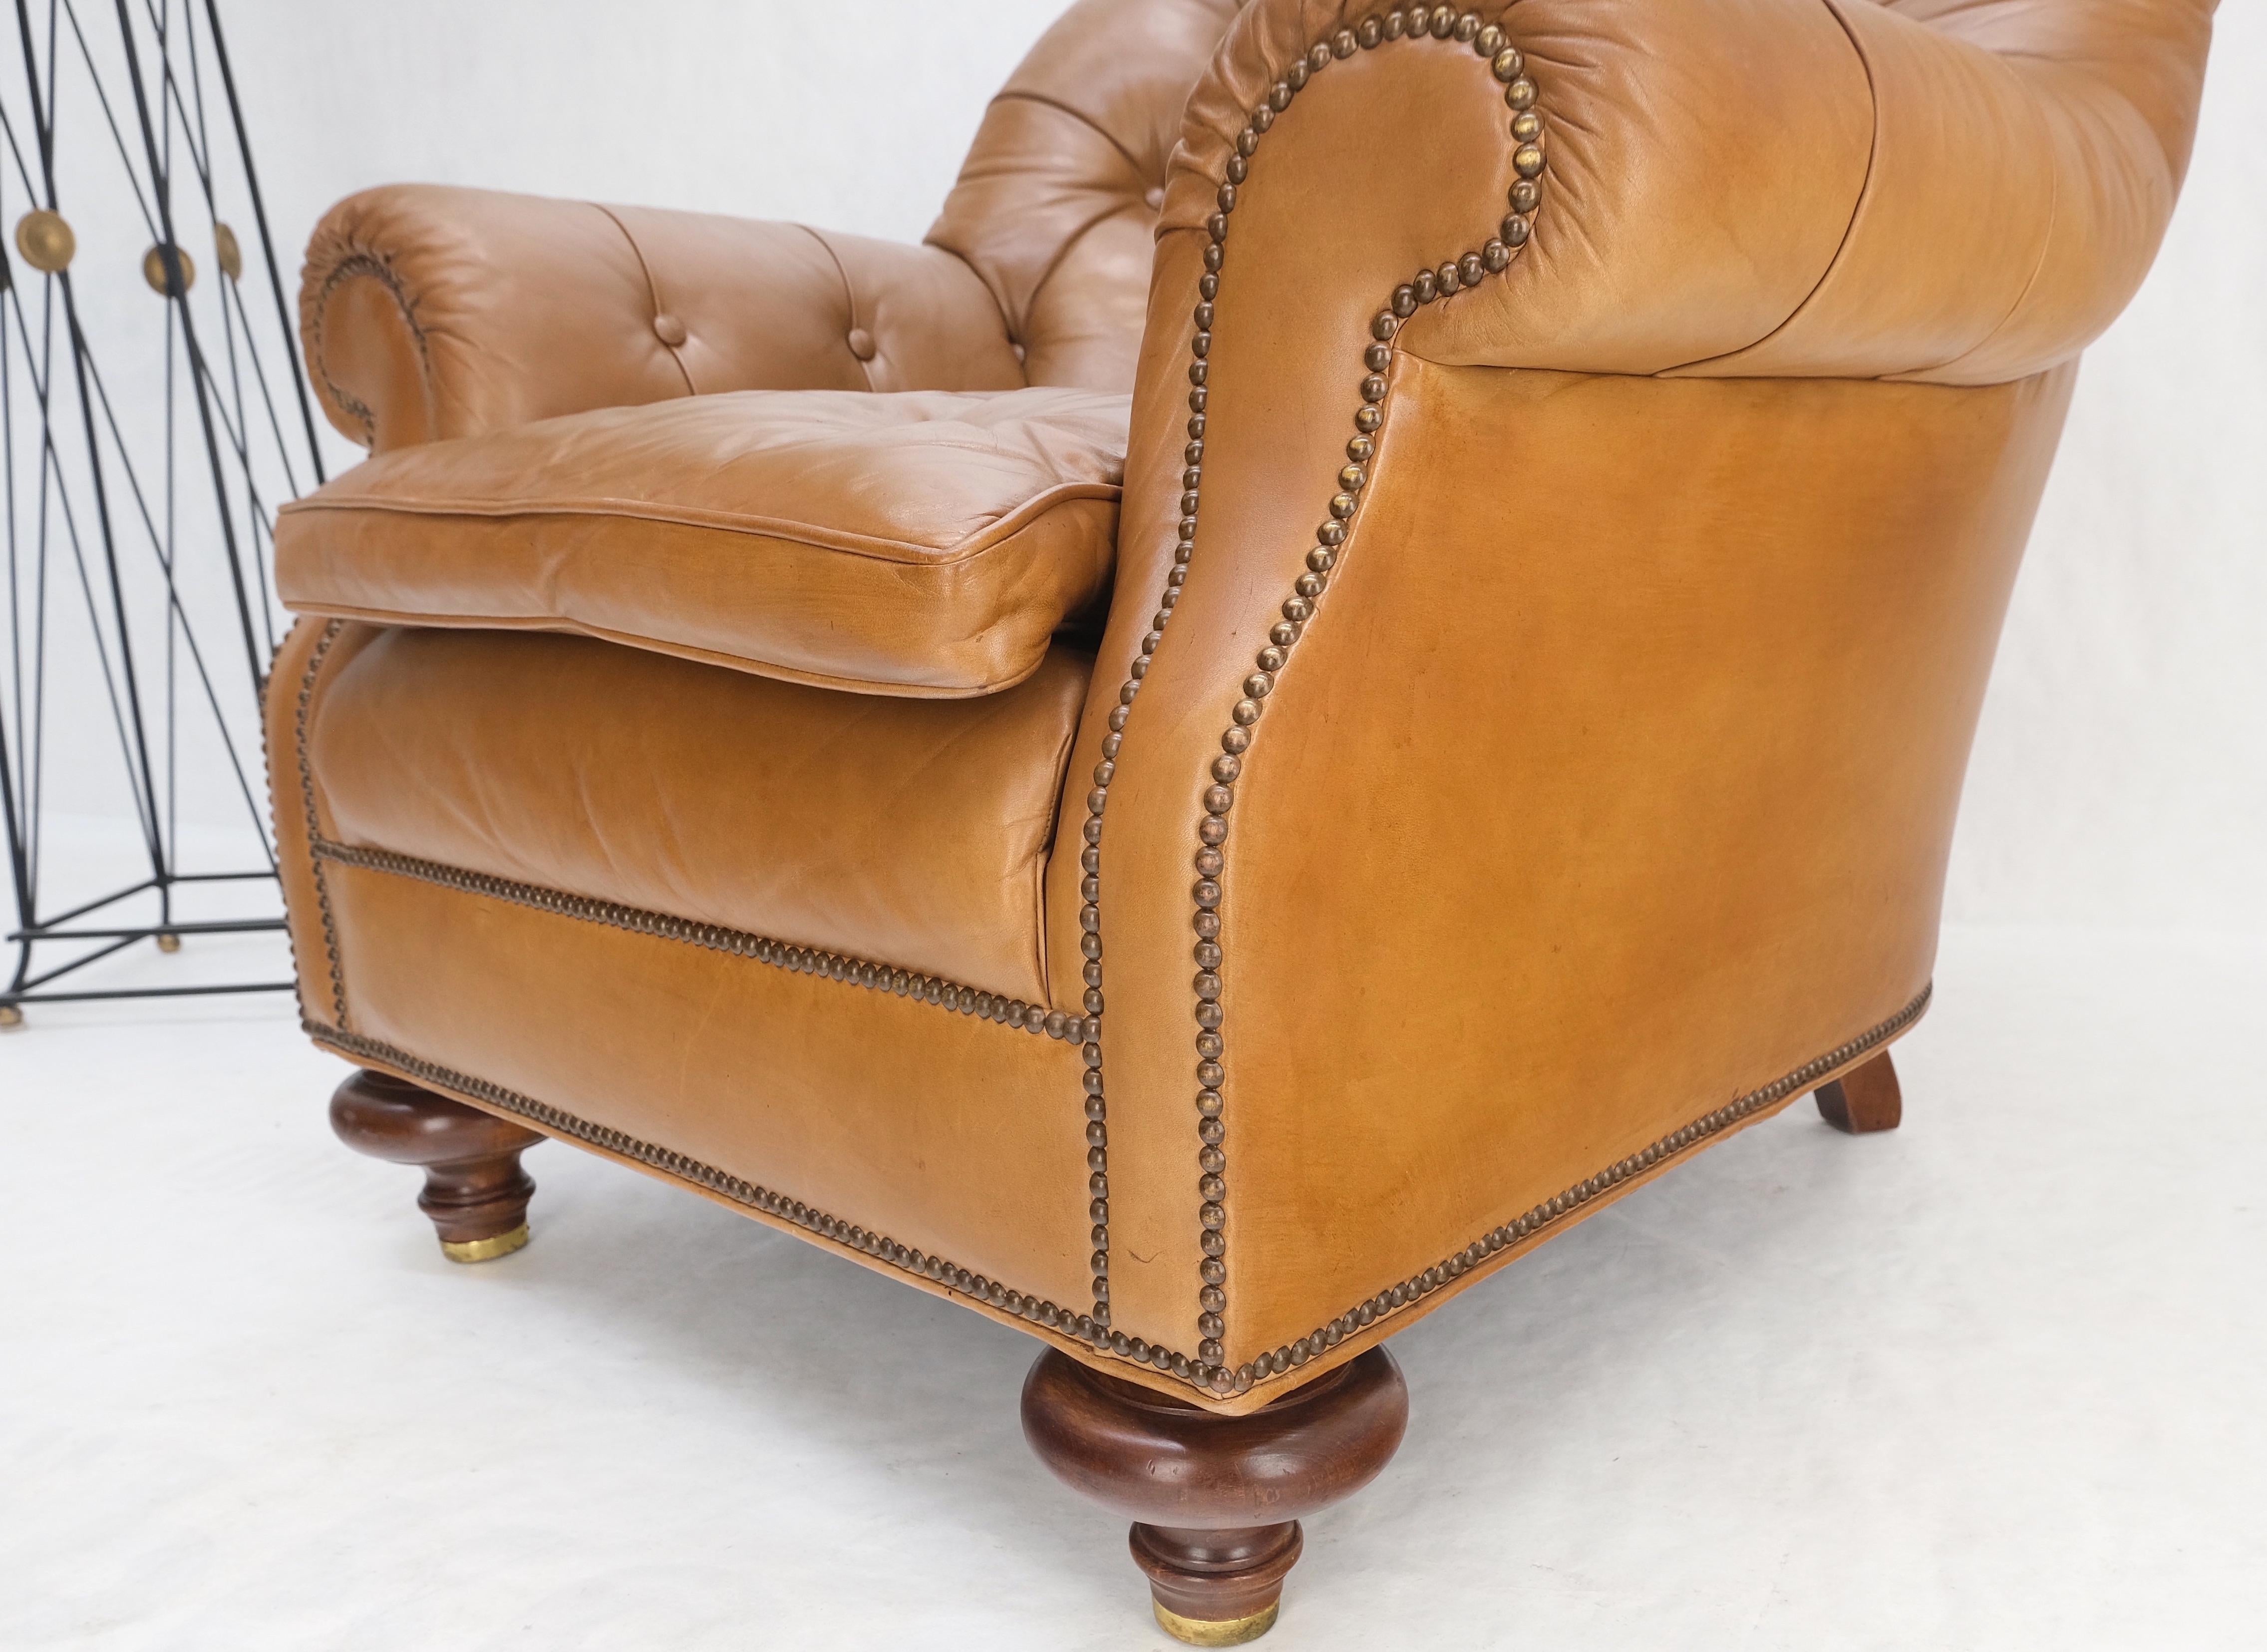 Brass Baker Tan Leather Tufted Back Large Arm Chair w/ Ottoman Pouf Turned Legs MINT! For Sale